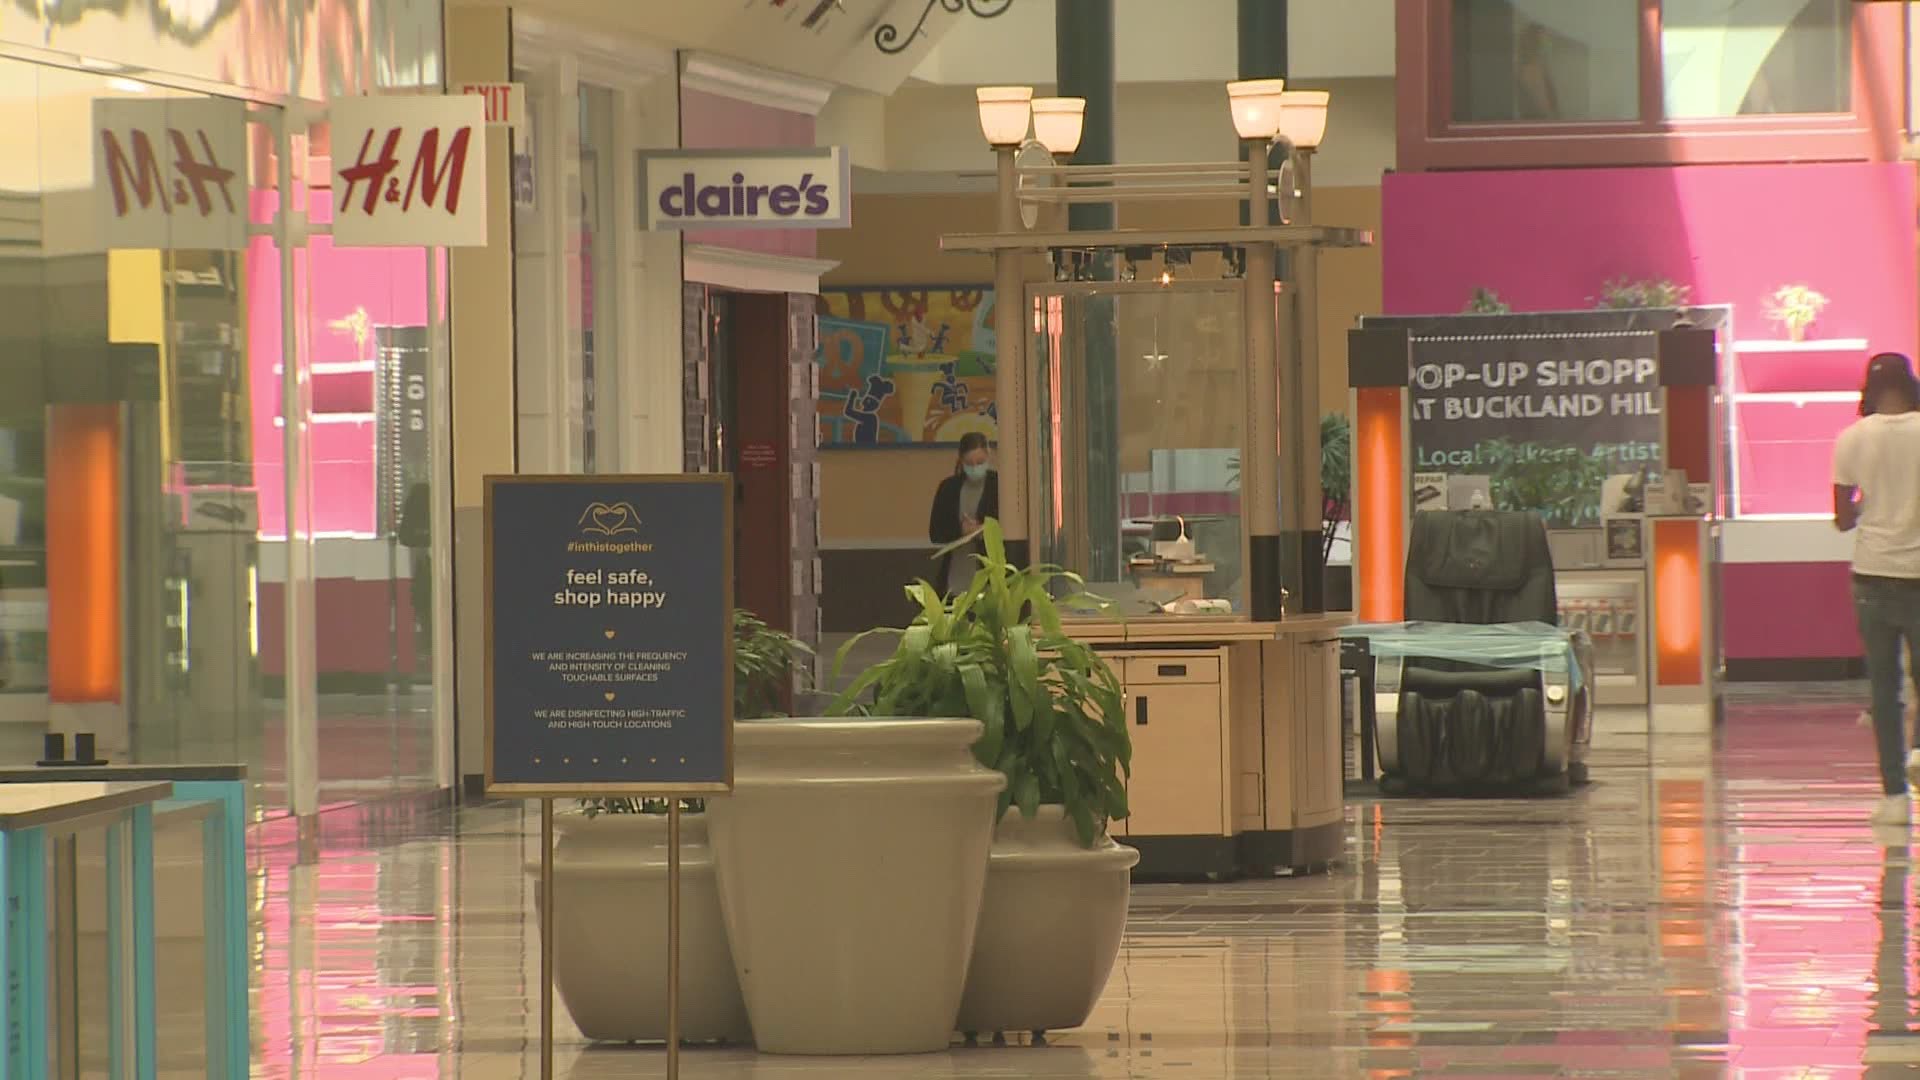 Retailers take precautions as they open their doors